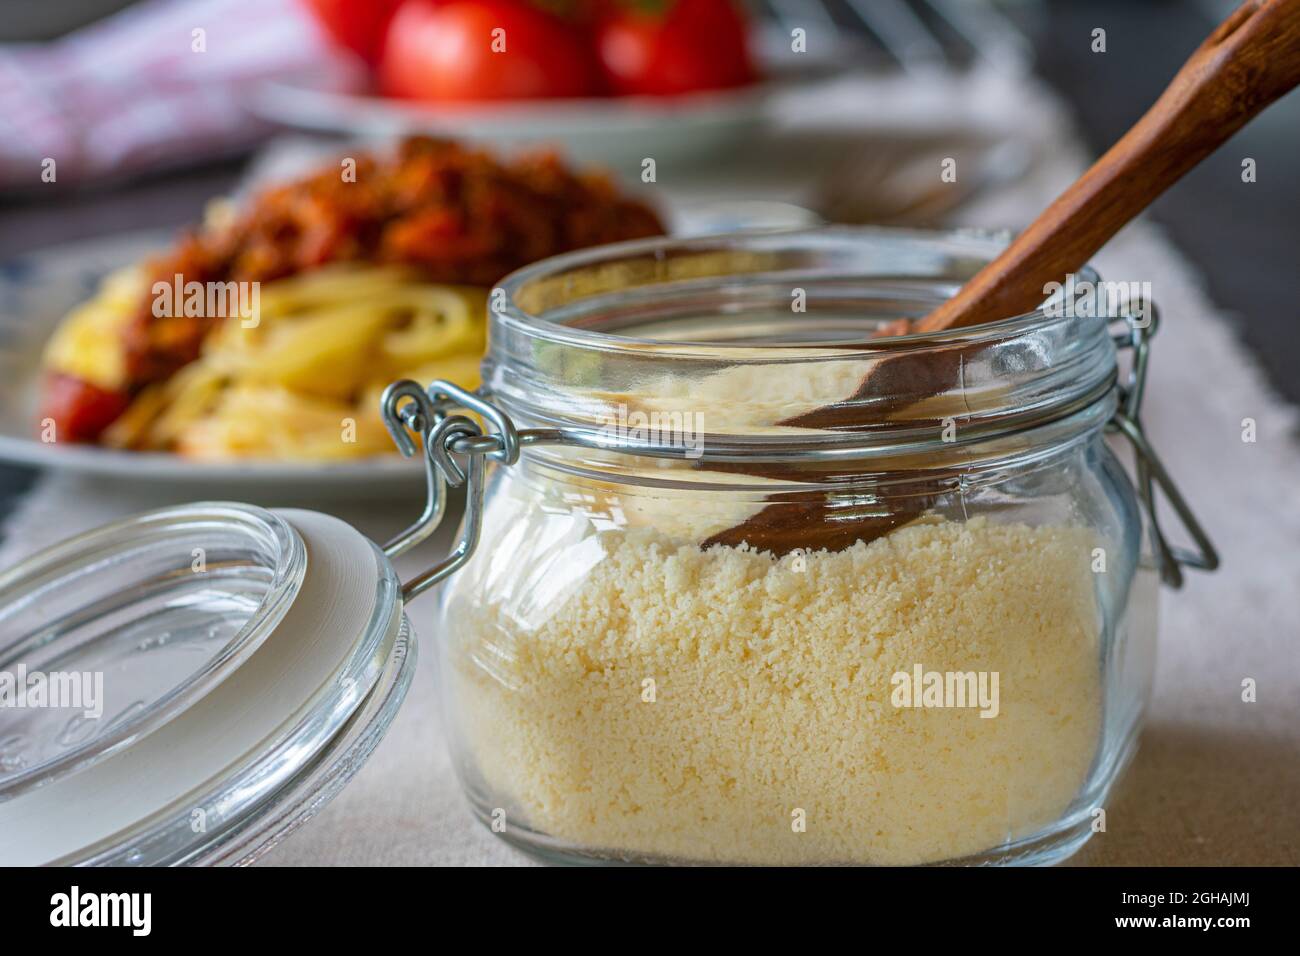 Jar with grated parmesan cheese Stock Photo